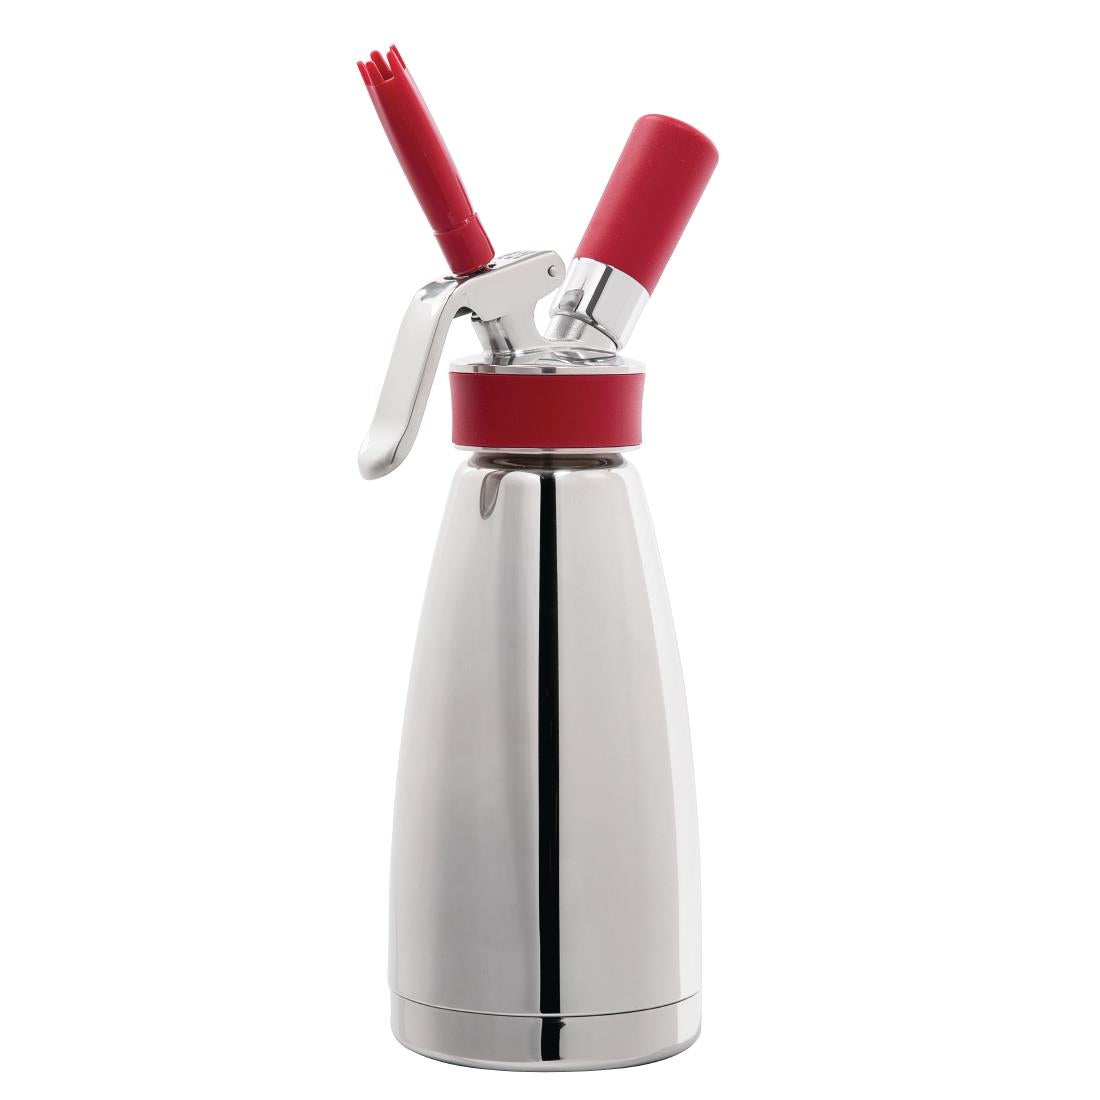 ISI Thermo Whipped Cream Dispenser 500ml JD Catering Equipment Solutions Ltd